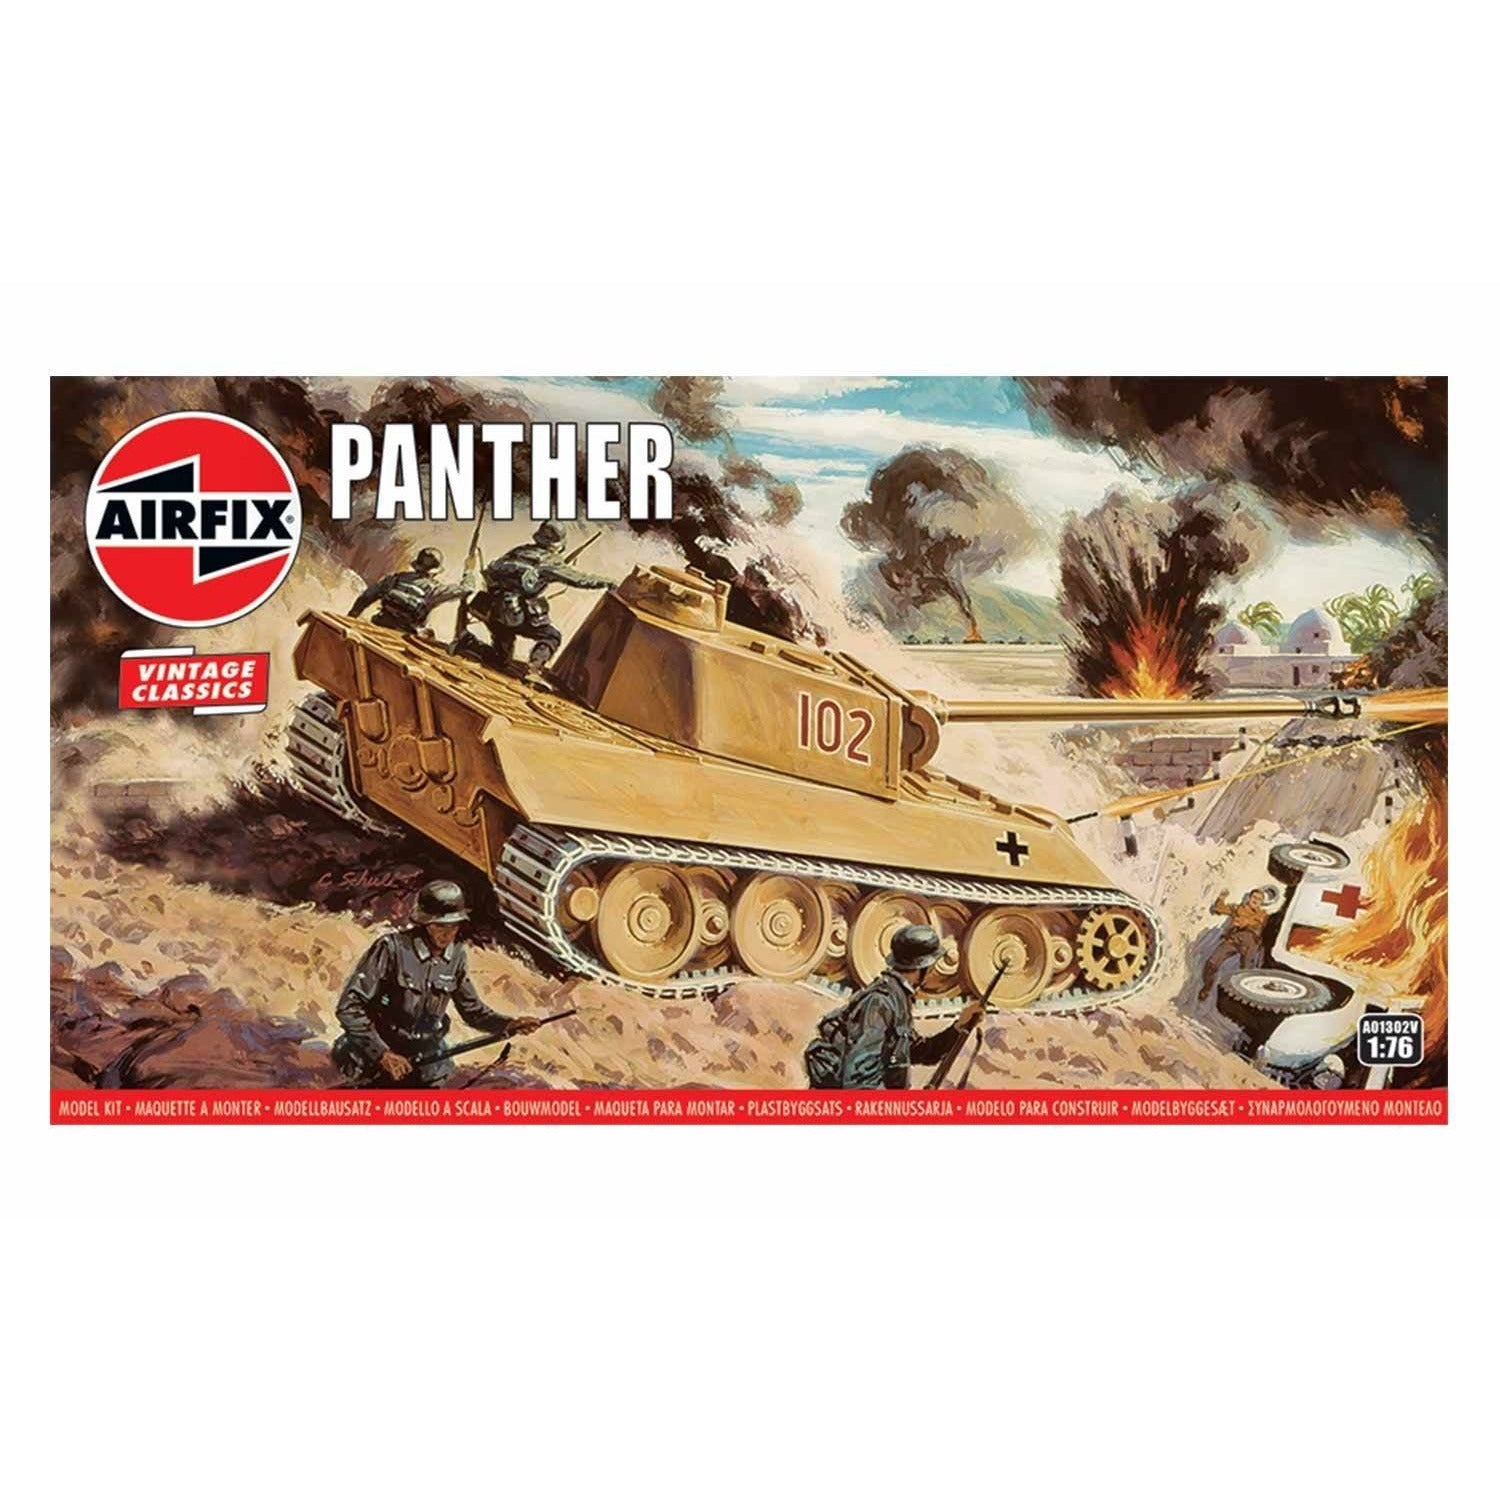 Panther Tank 1/76 by Airfix